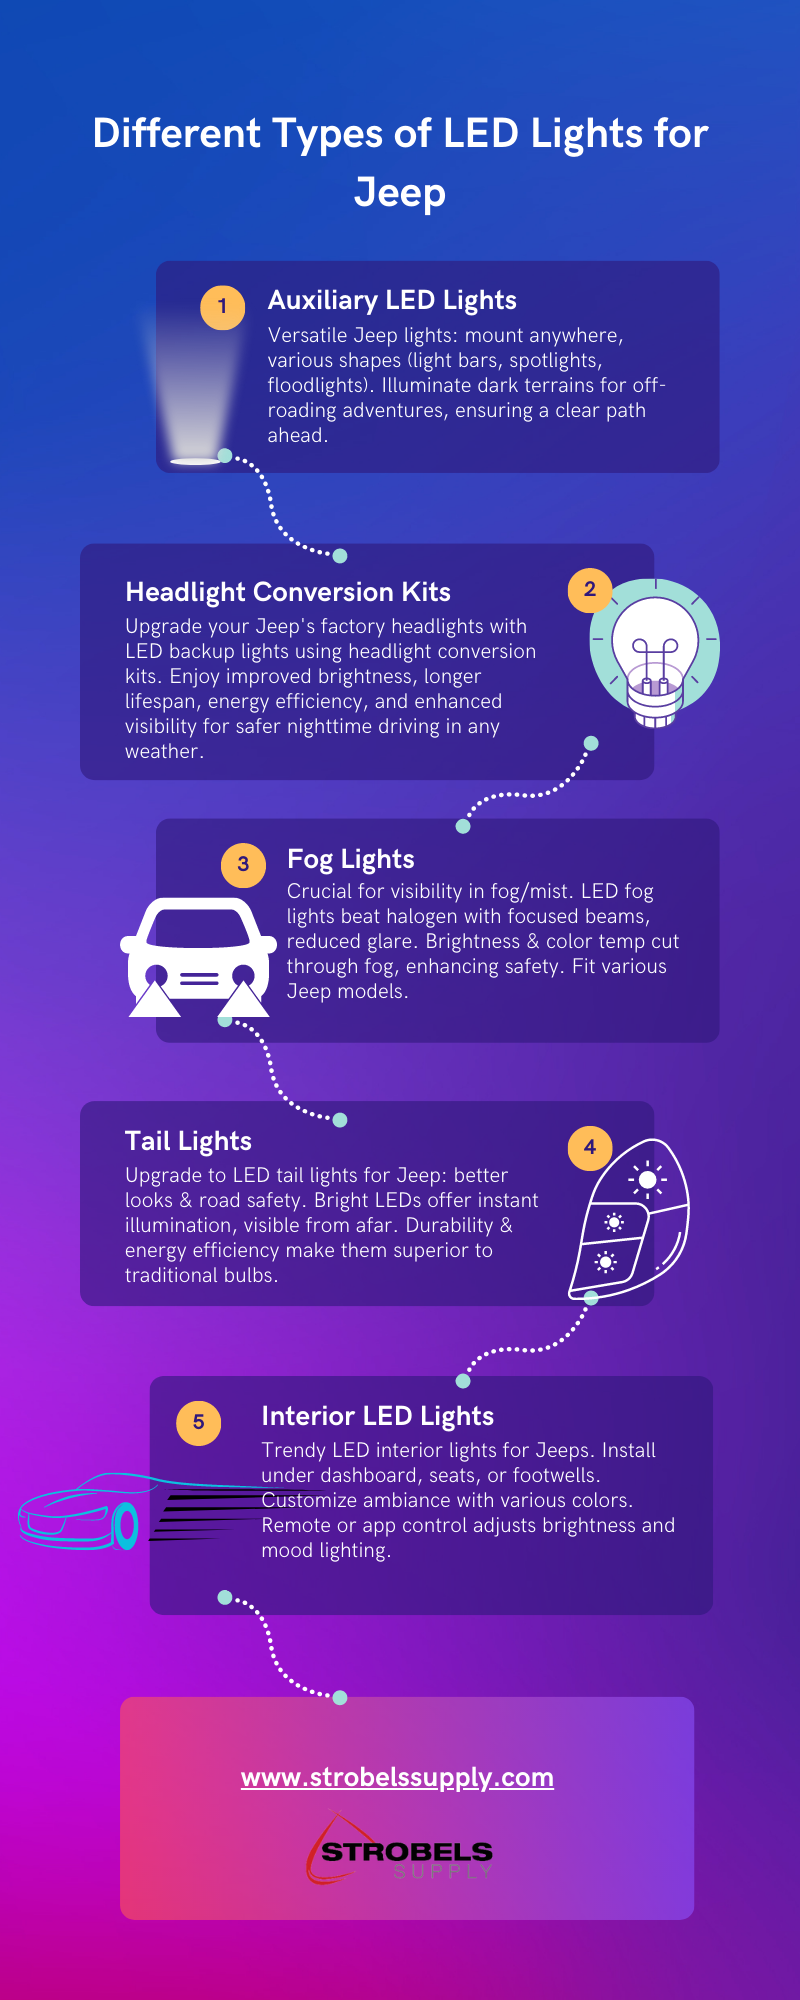 Different Types of LED Lights for Jeep